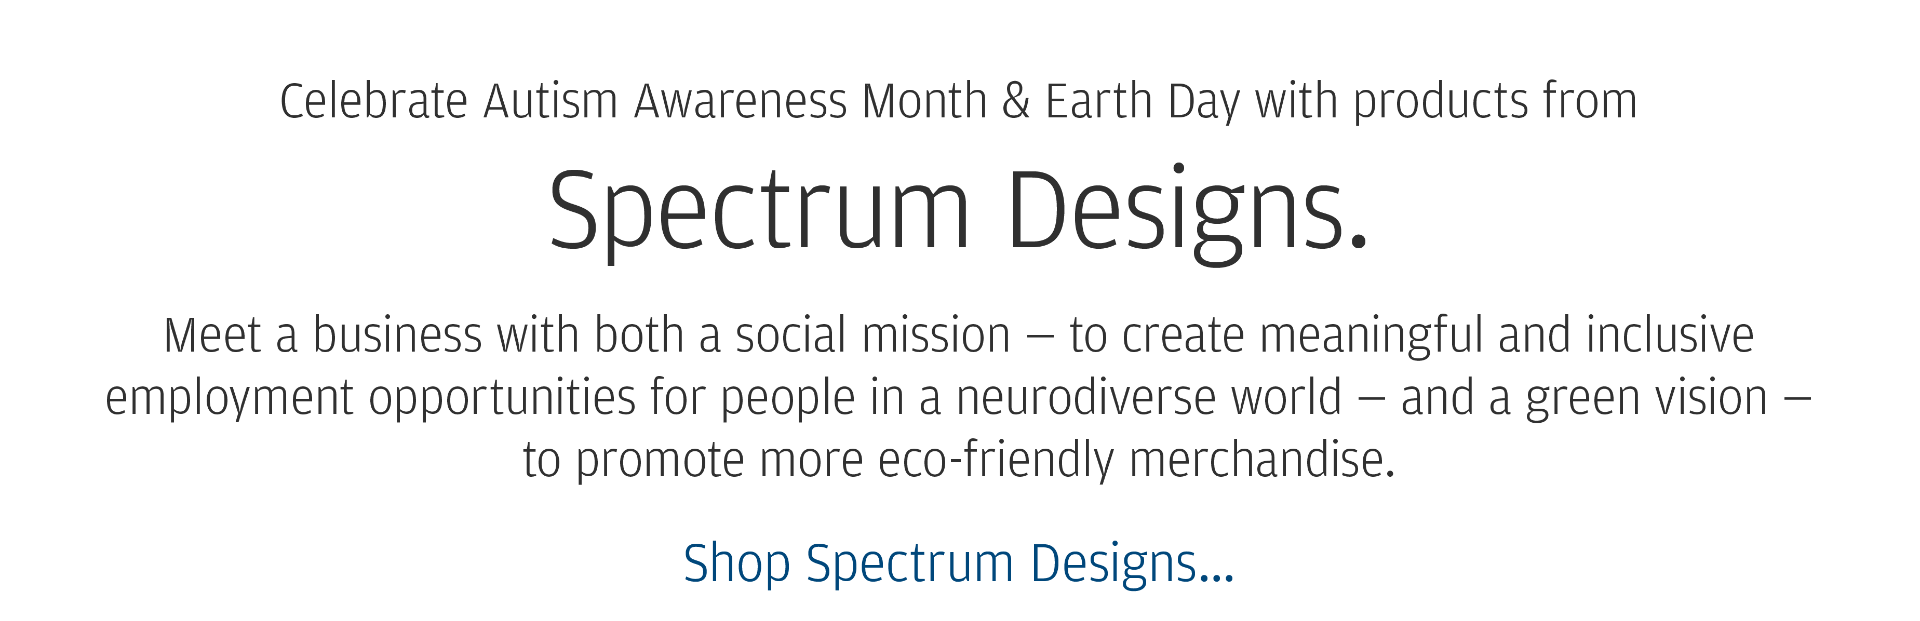 Shop & Support items from Spectrum Designs.